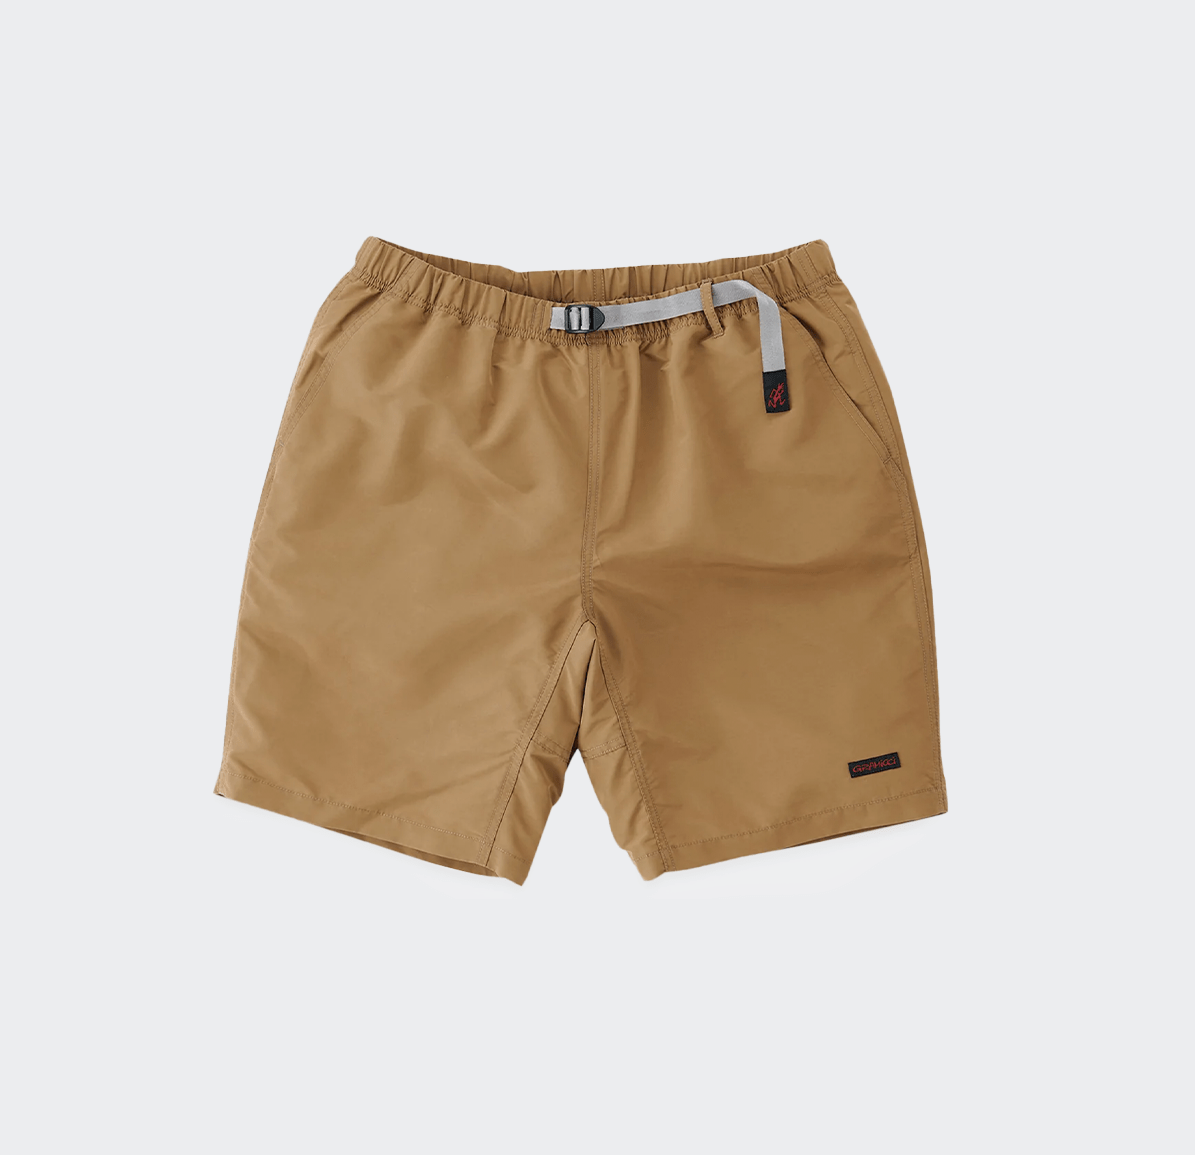 Gramicci Shell Packable Shorts - Tan - Gramicci - State Of Play